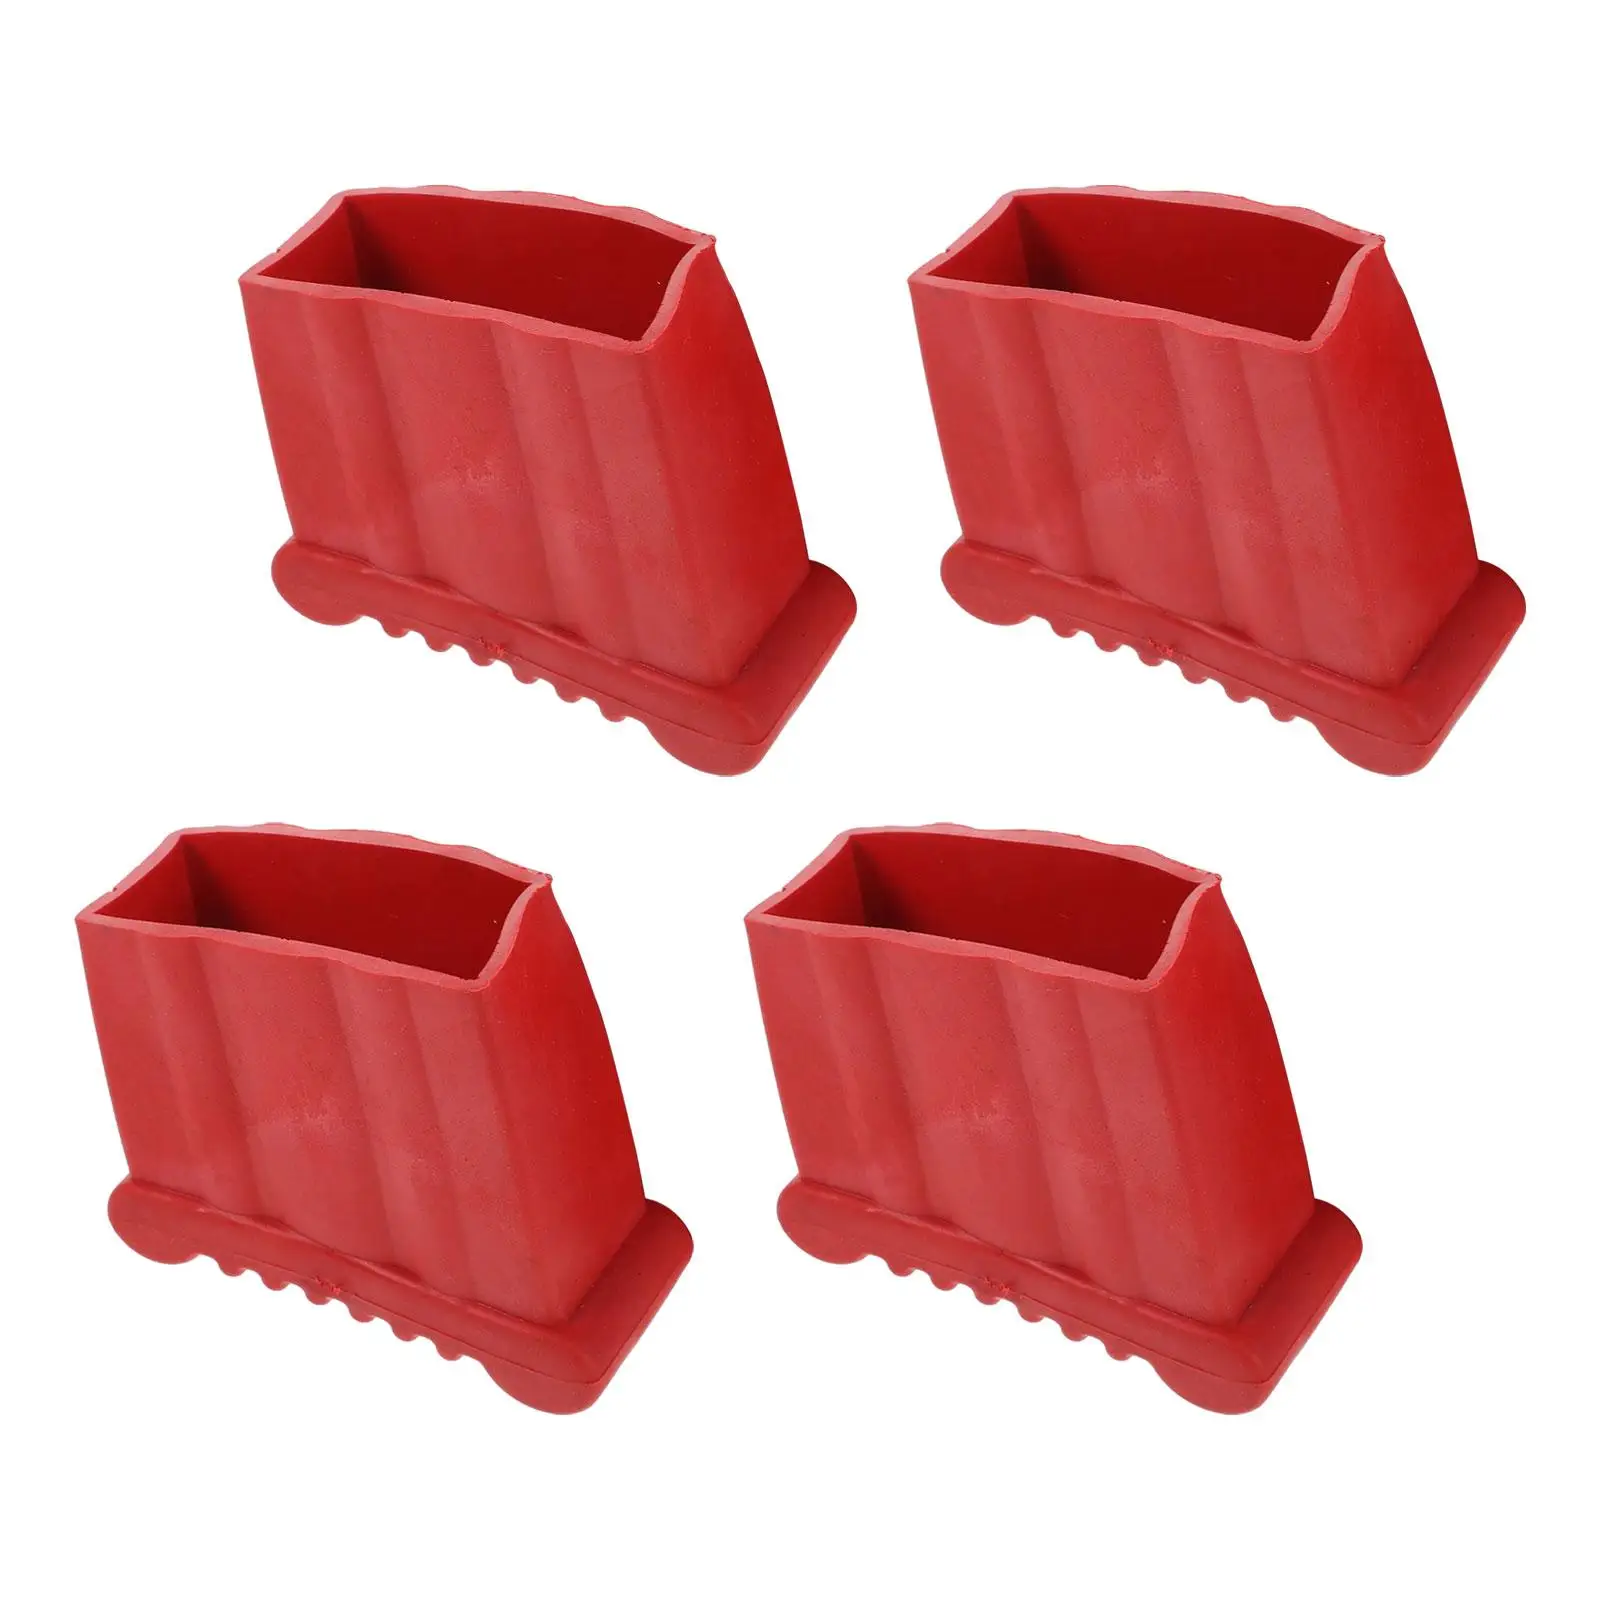 4Pcs Ladder Feet Covers Suitable for Most Ladders Durable Easy to Install Cushion Replacement Convenient Extension Ladder Covers